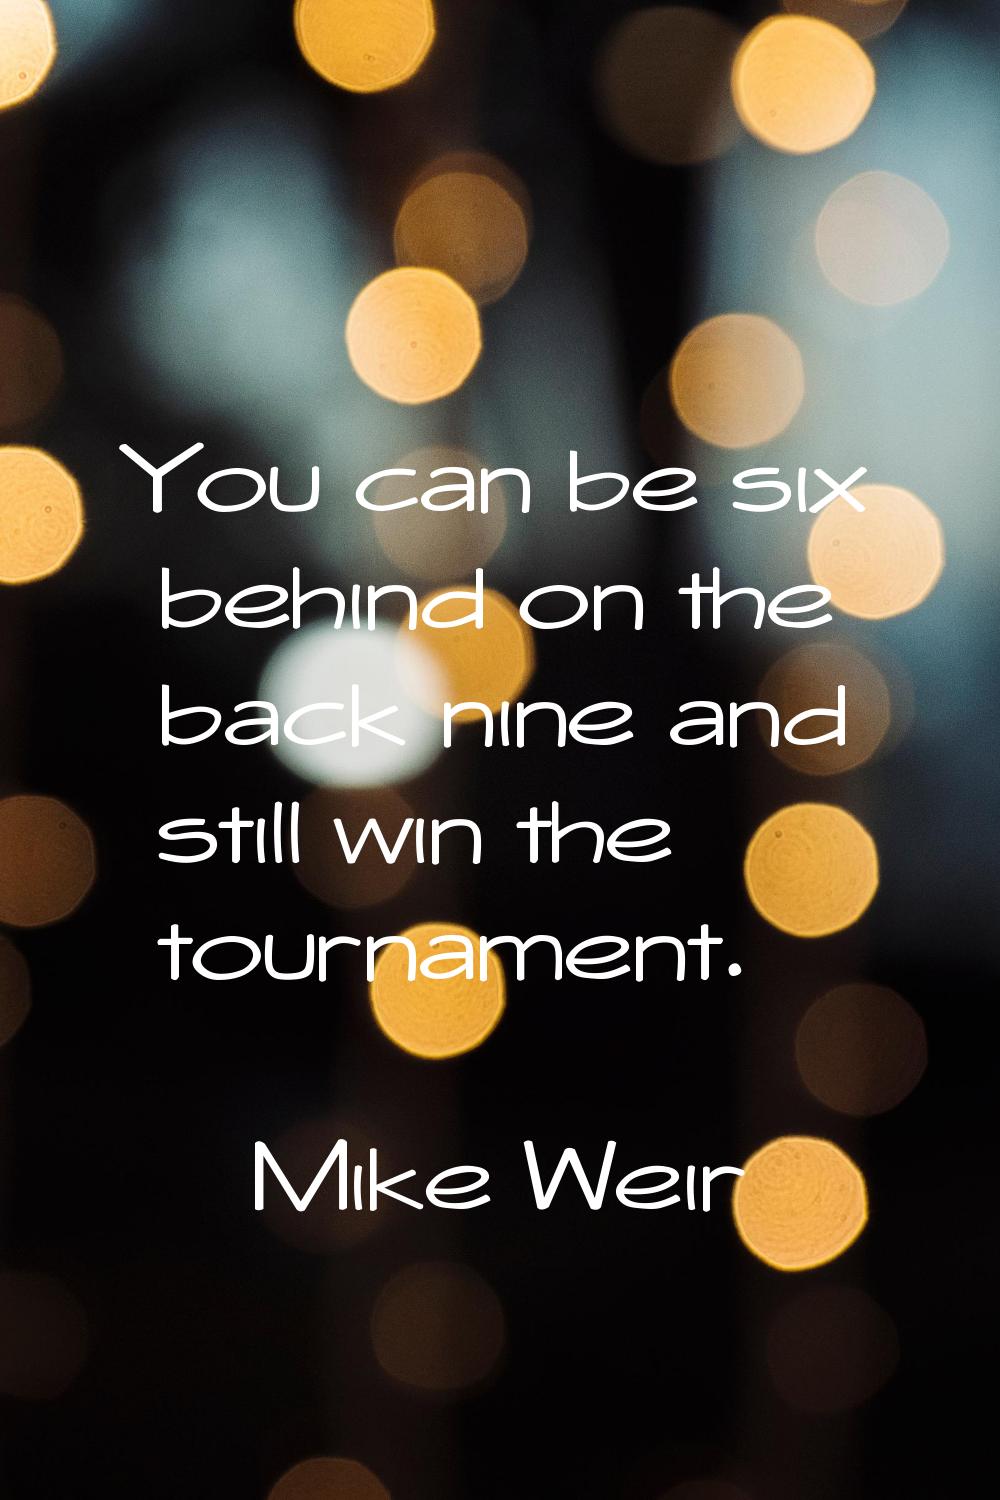 You can be six behind on the back nine and still win the tournament.